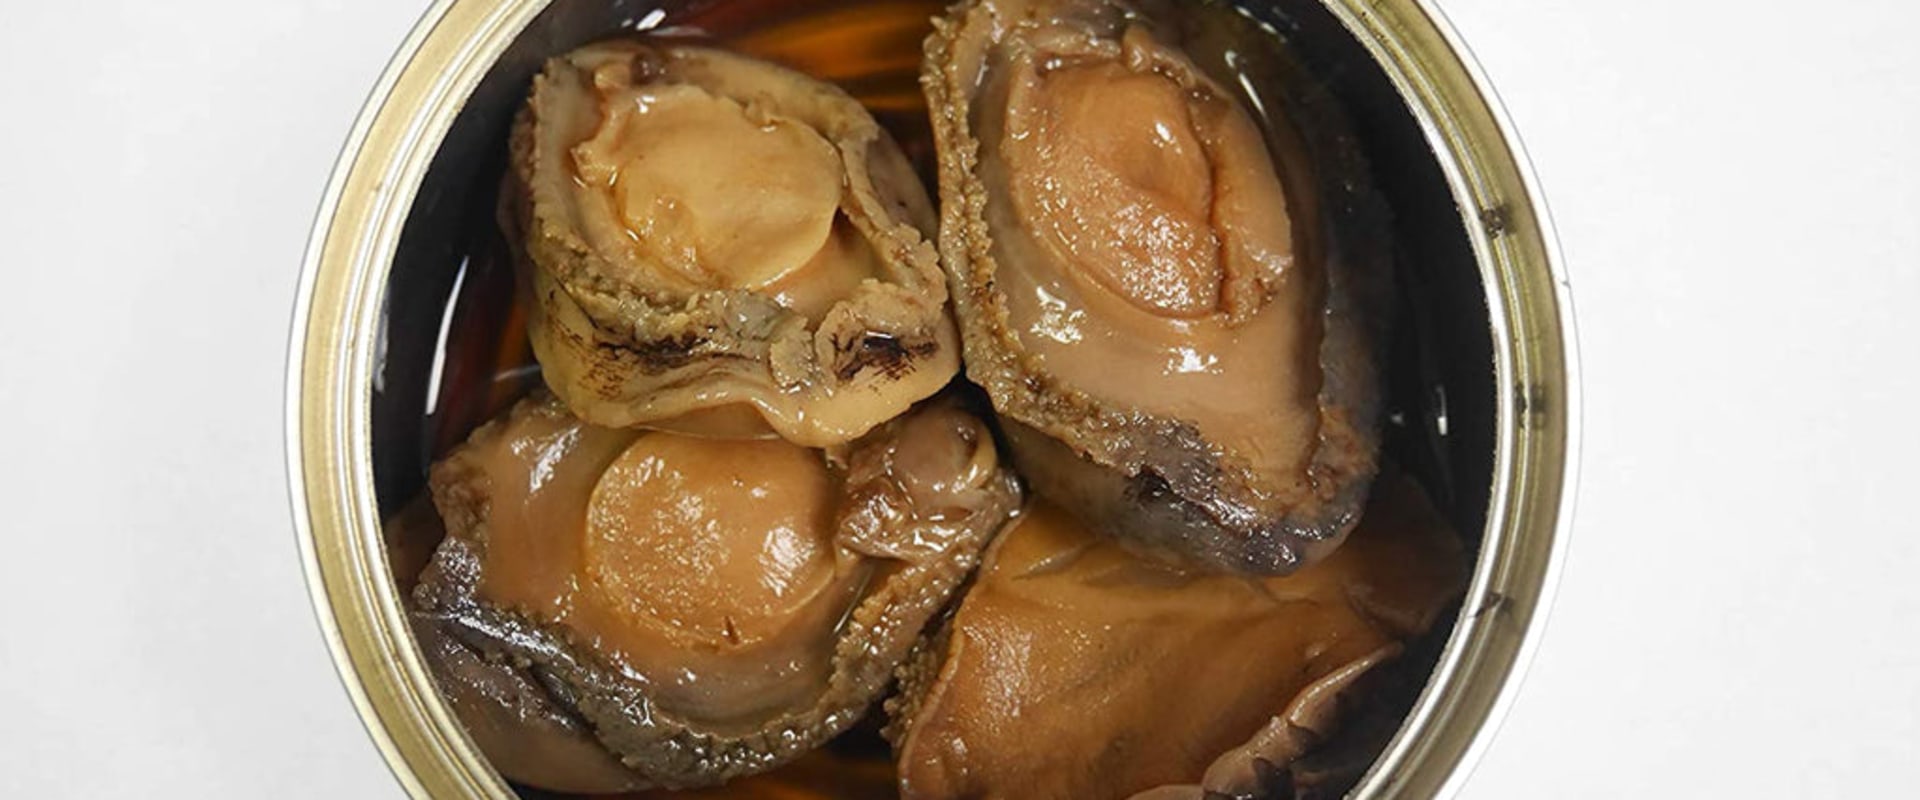 Where to buy canned abalone in mexico?